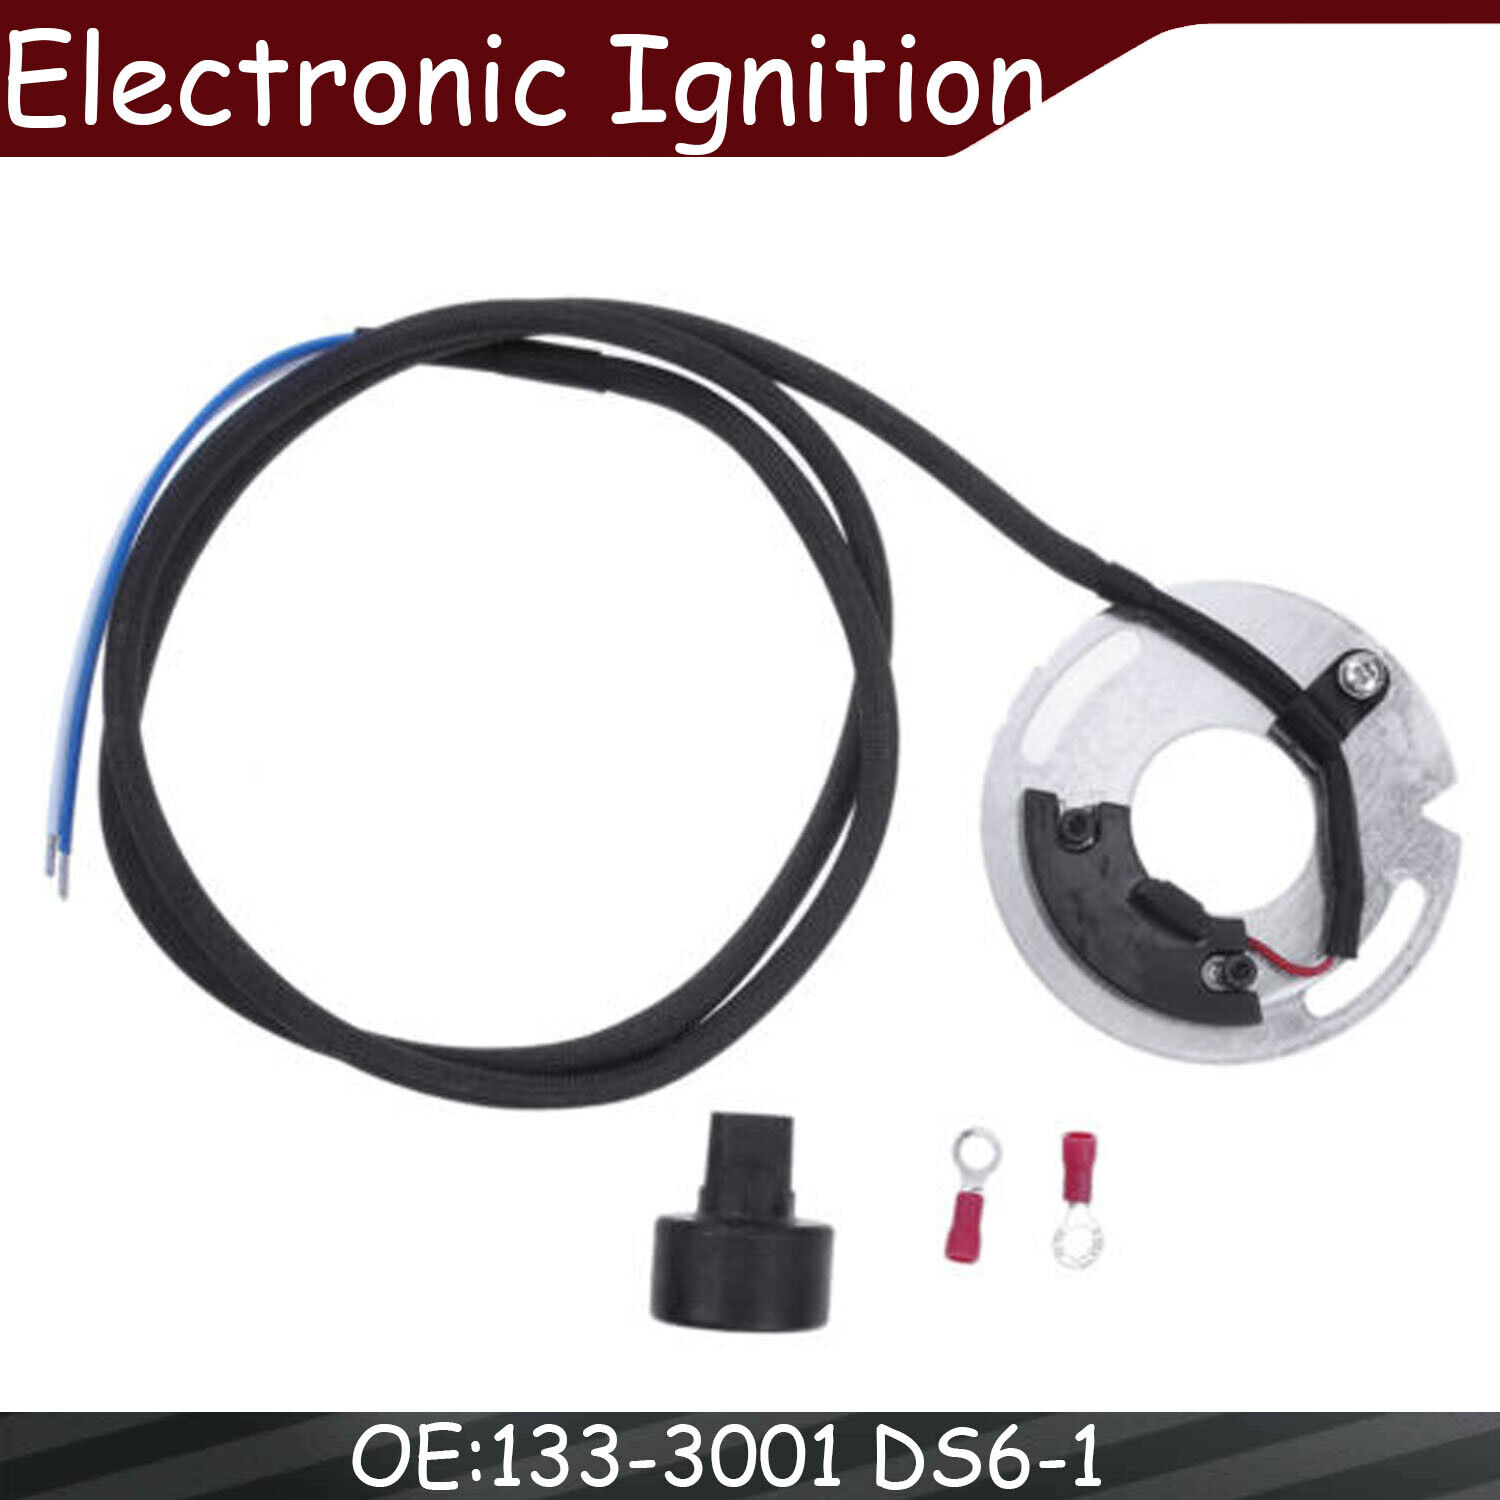 Dynatek - DS6-1 - Electronic Ignition System, Dual Fire 21-7561 133-3001